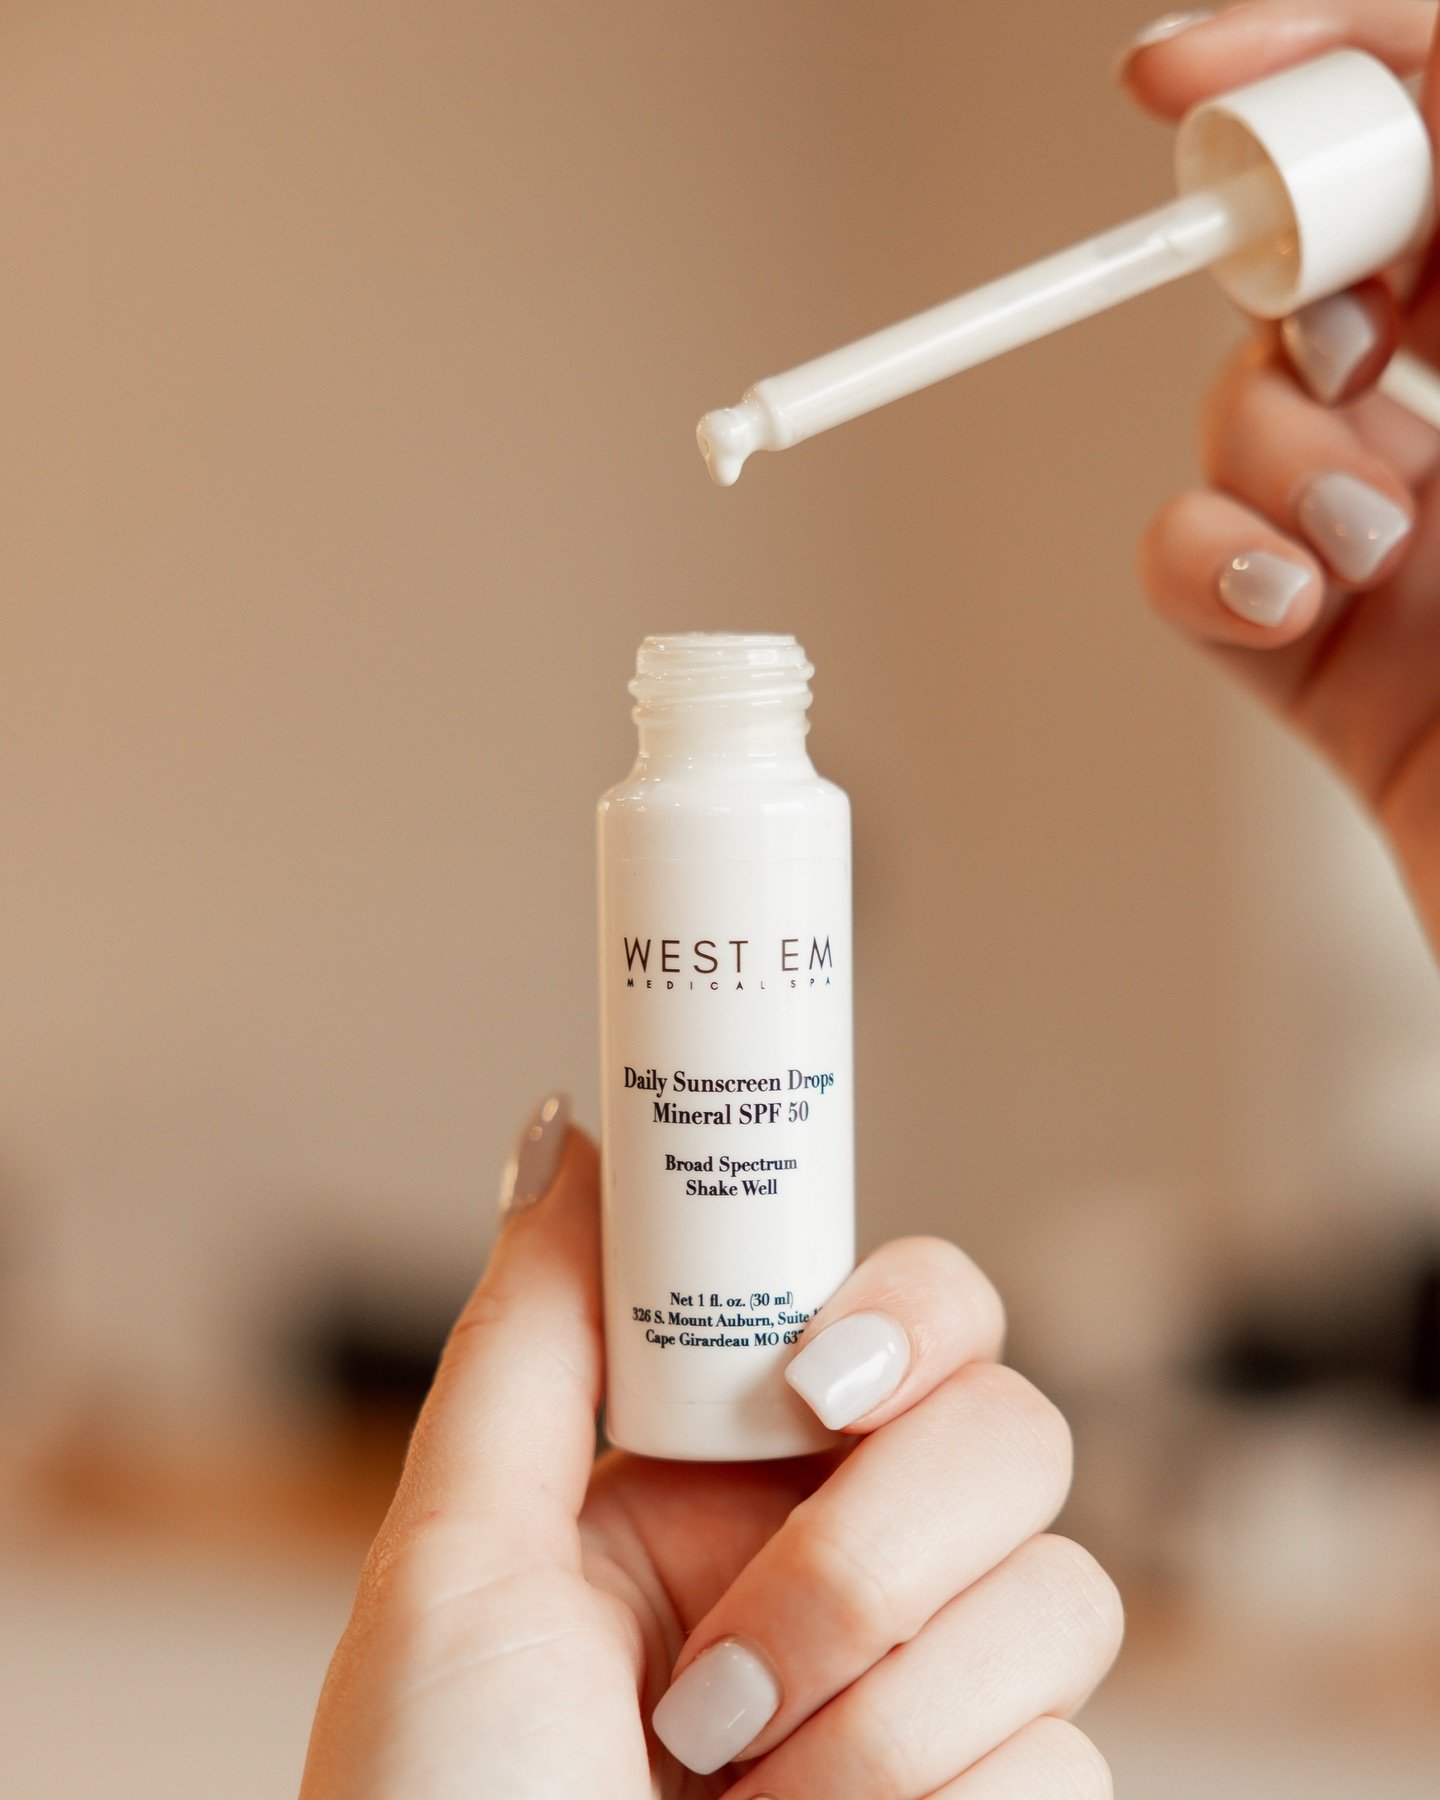 NEW SUNSCREEN DROPS

We are so excited to now be carrying West Em sunscreen drops. 

This sheer, lightweight mineral sun serum provides broad-spectrum UVA/UVB SPF 50 sunscreen protection. 

Potent antioxidants visibly brighten, nourish and soothe, le